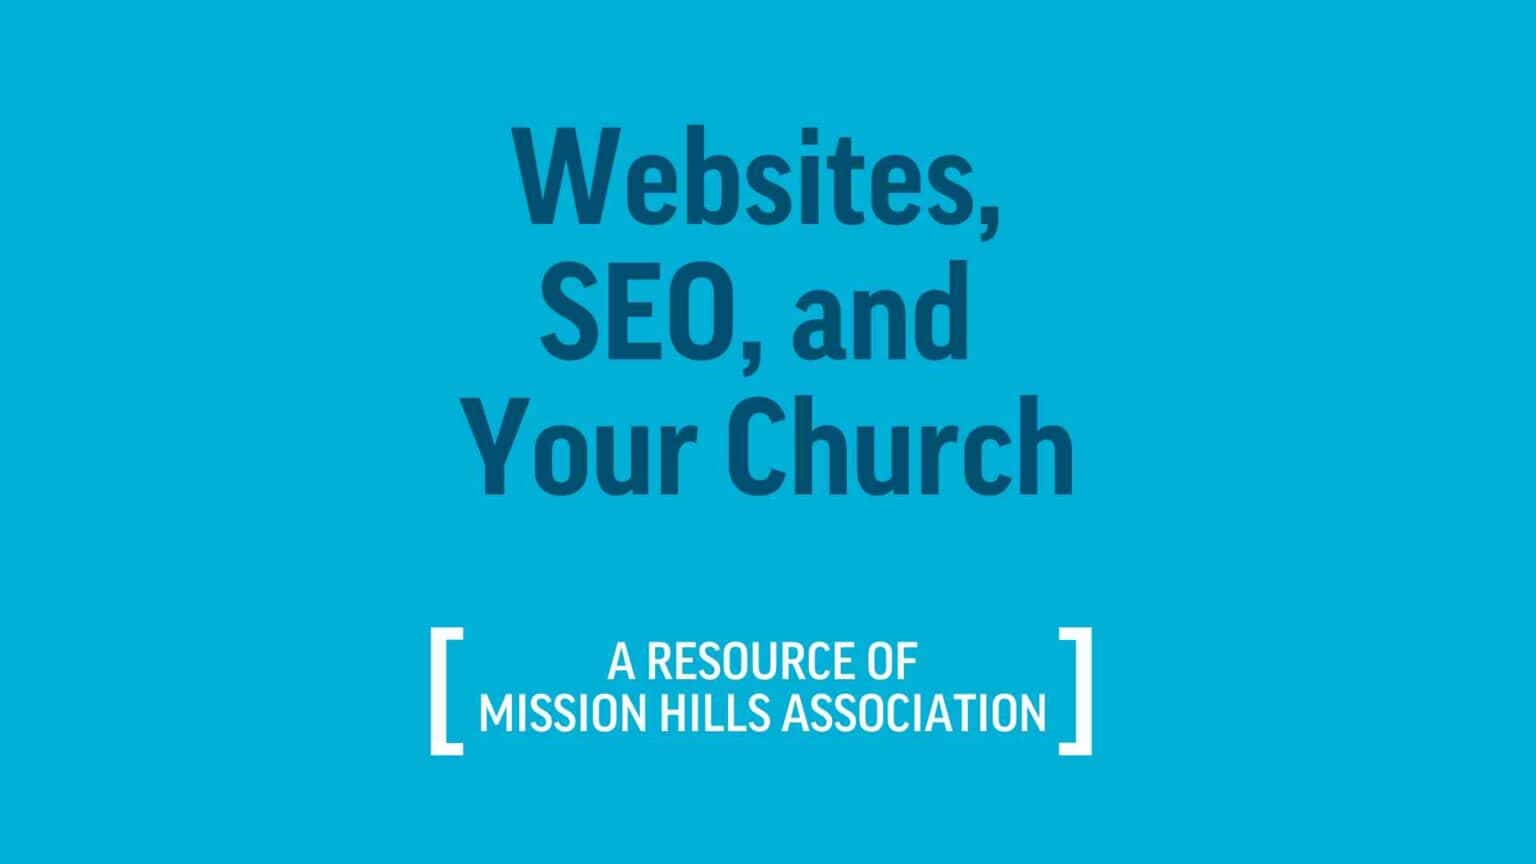 Websites, SEO, and Your Church